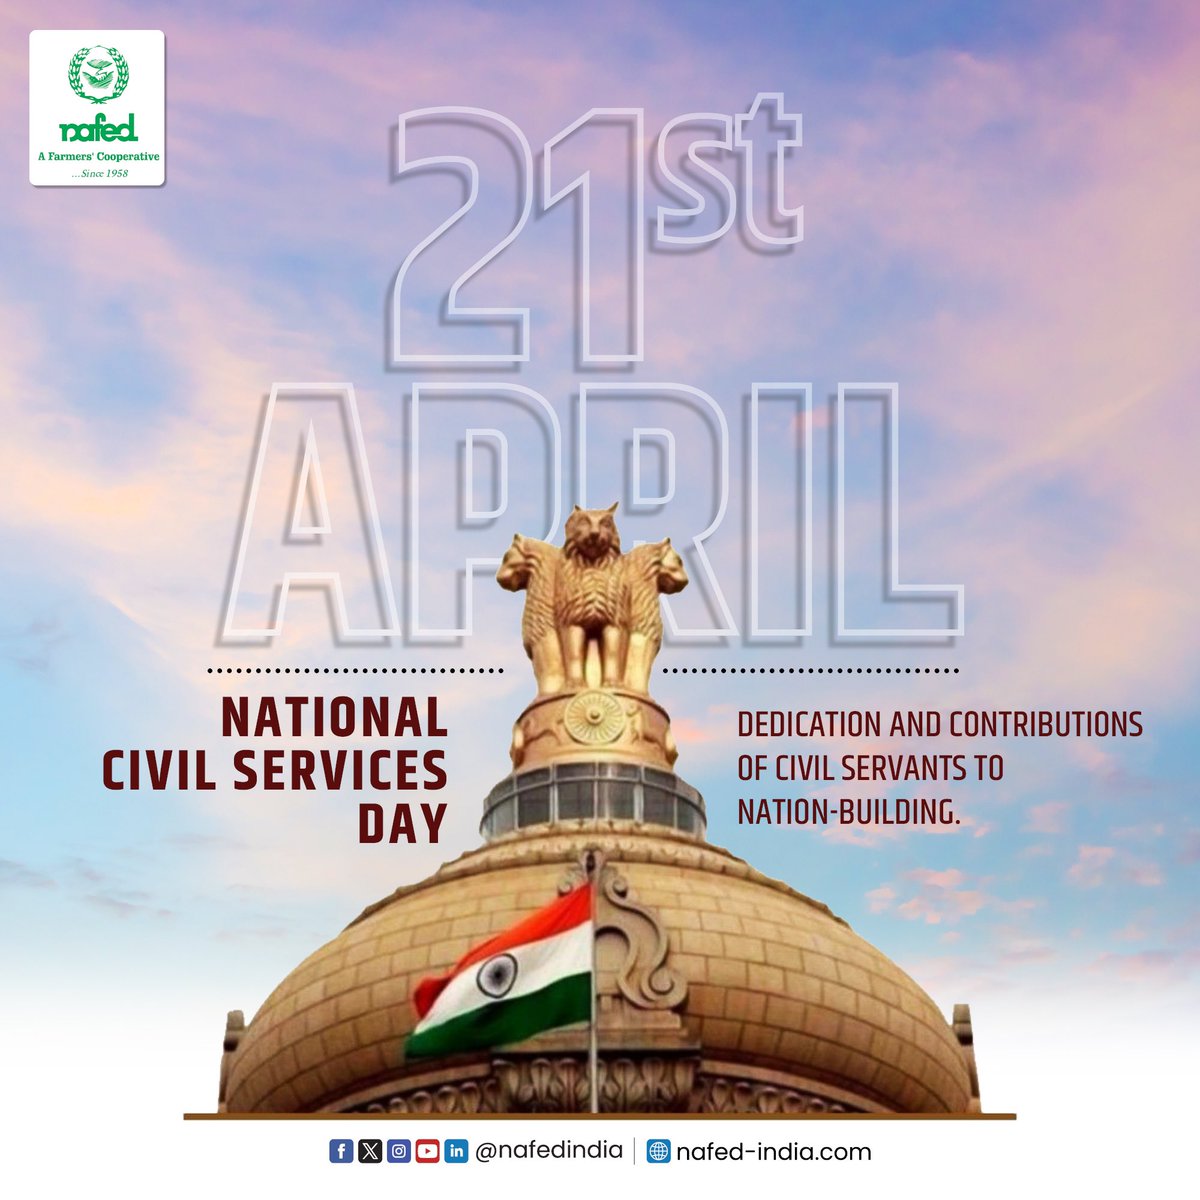 Today, we honor the dedication and hard work of civil servants who tirelessly serve our nation. From ensuring public safety to delivering essential services, their commitment is invaluable.

#NAFED #NAFEDIndia #NationalCivilServiceDay #CivilServants #CivilServices